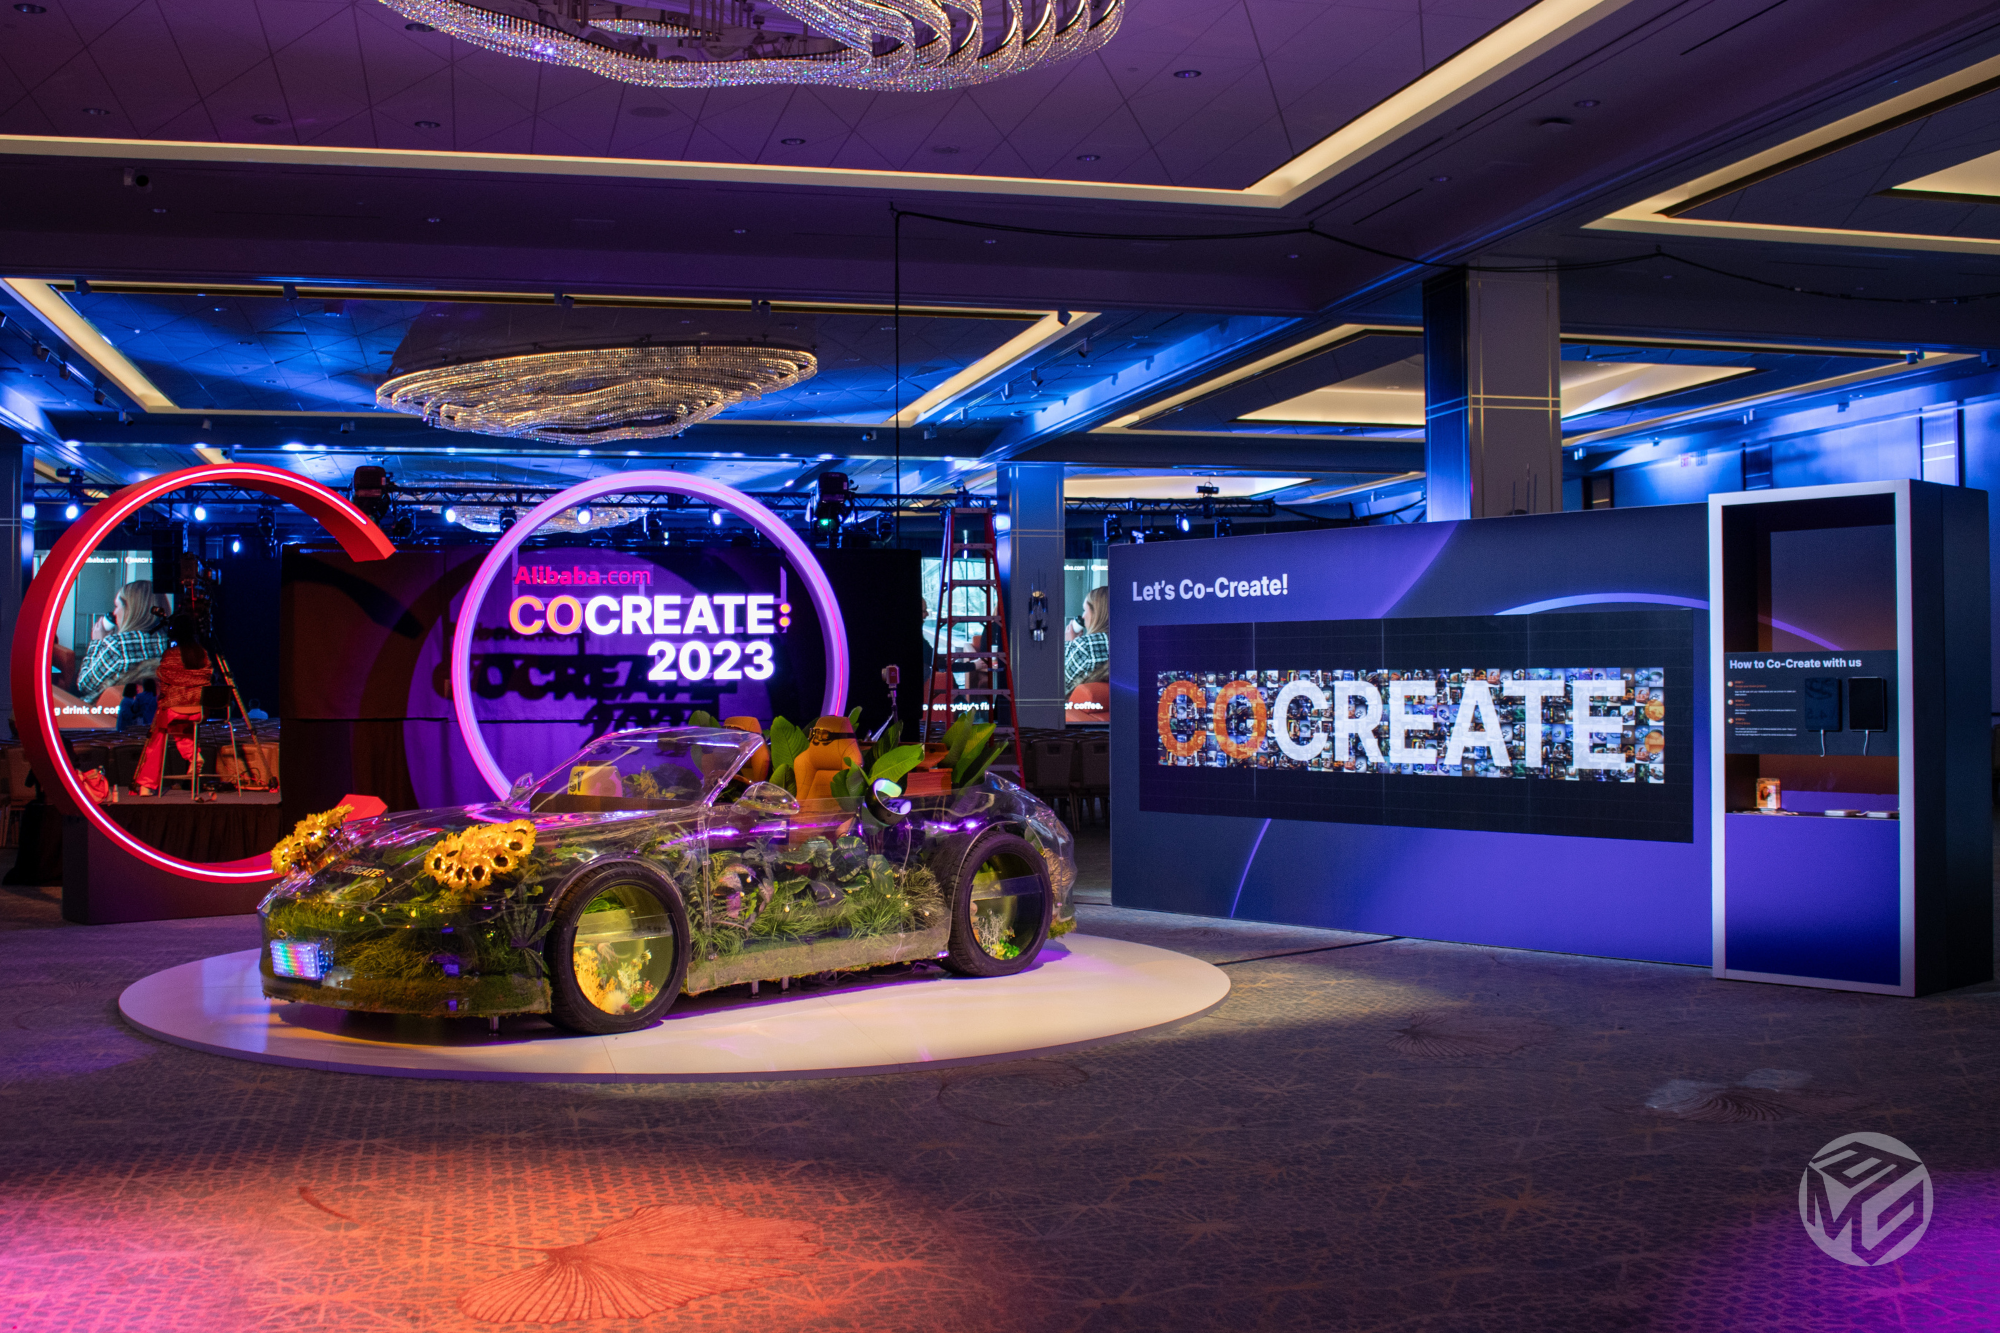 Artsolute Media Group Co-Creates an Unforgettable Event for Alibaba.com 2023